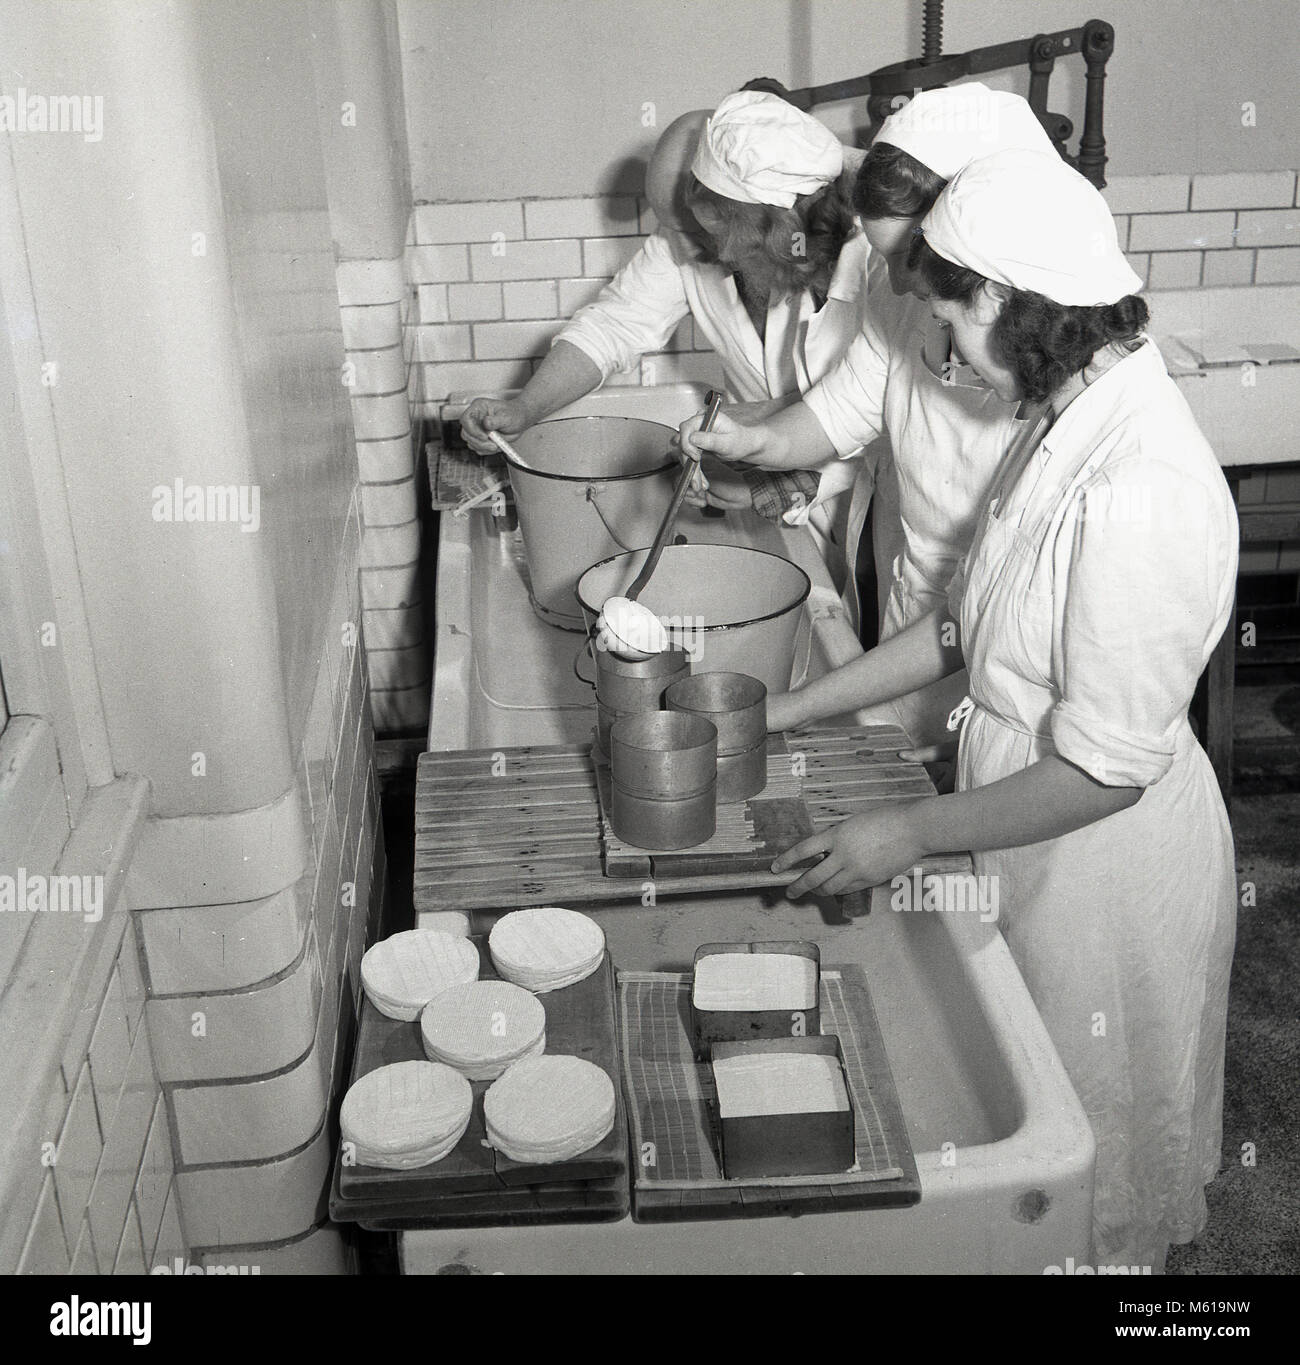 1950s, historical picture showing three young female agricultural students inside a dairy making cheese. Such hands-on experience to learn new skills and take advantage of opportunities in the farming sector in post-war Britain was actively encouraged, as there was a need and a big demand for more home-grown food. Stock Photo